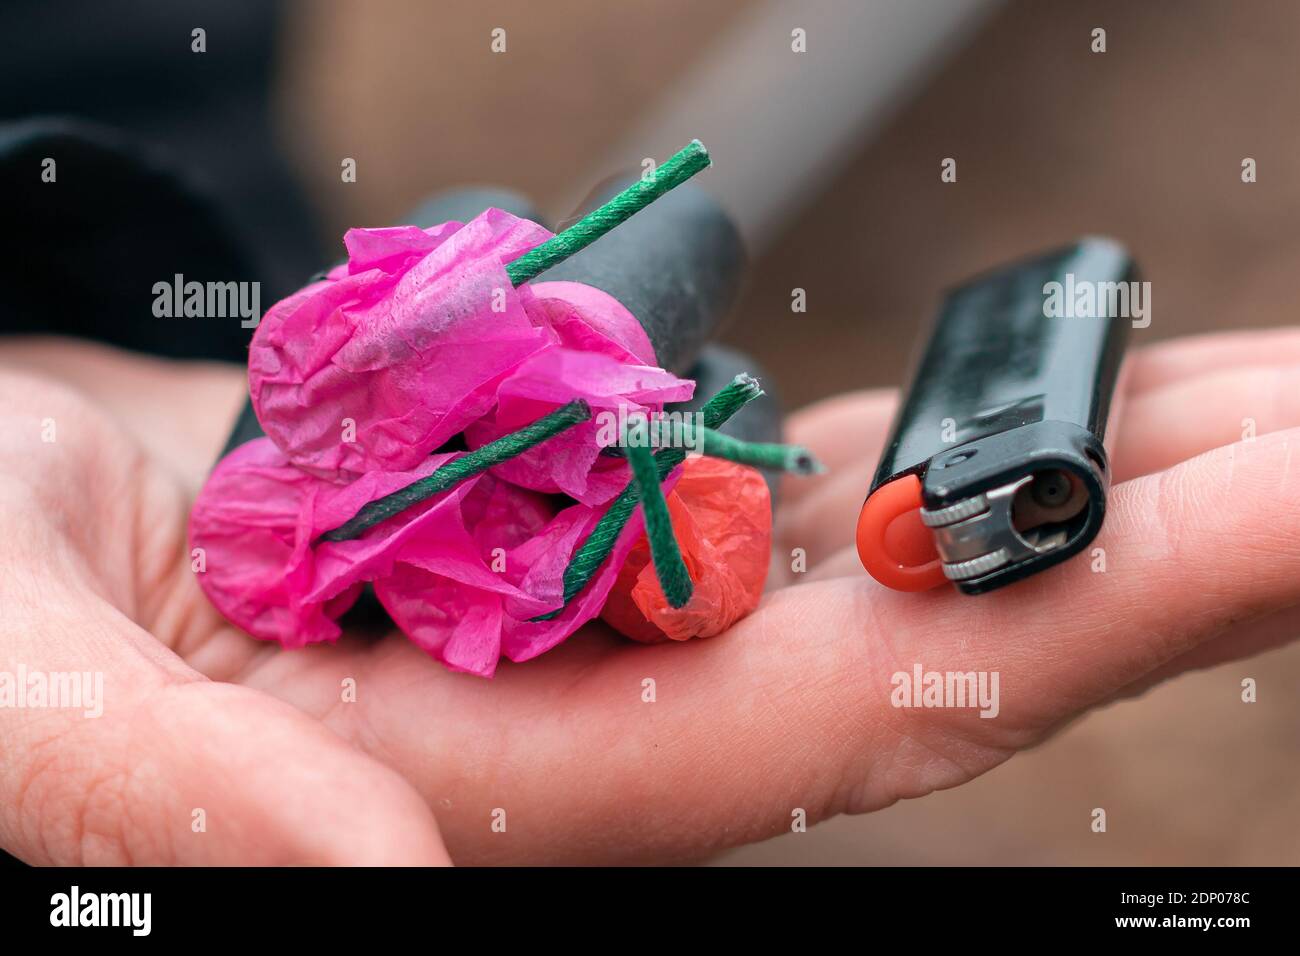 The Firecrackers in a Hand. Man Holding Five Black Petards with a Gas Lighter on His Palm. A Human with a Pyrotechnics Outdoors Stock Photo